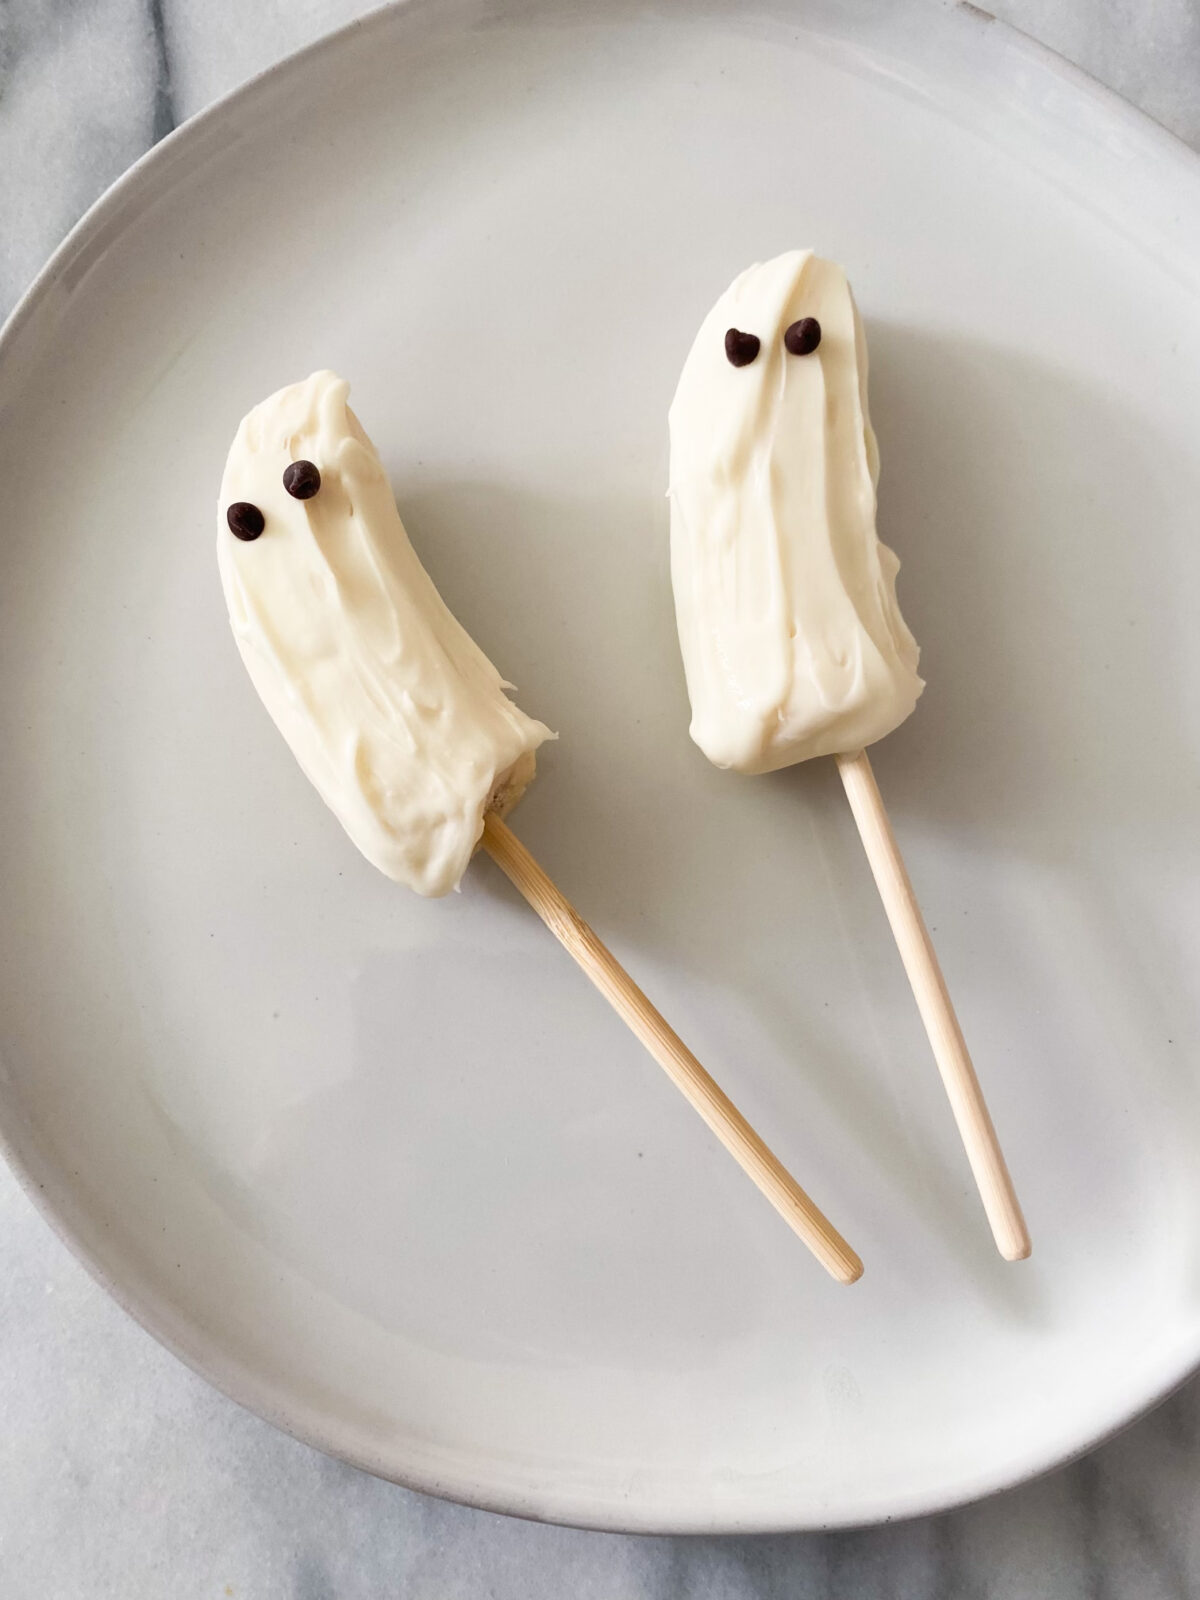 Two halves of a banana on skewers and dipped in white chocolate with mini chocolate chips as eyes. 